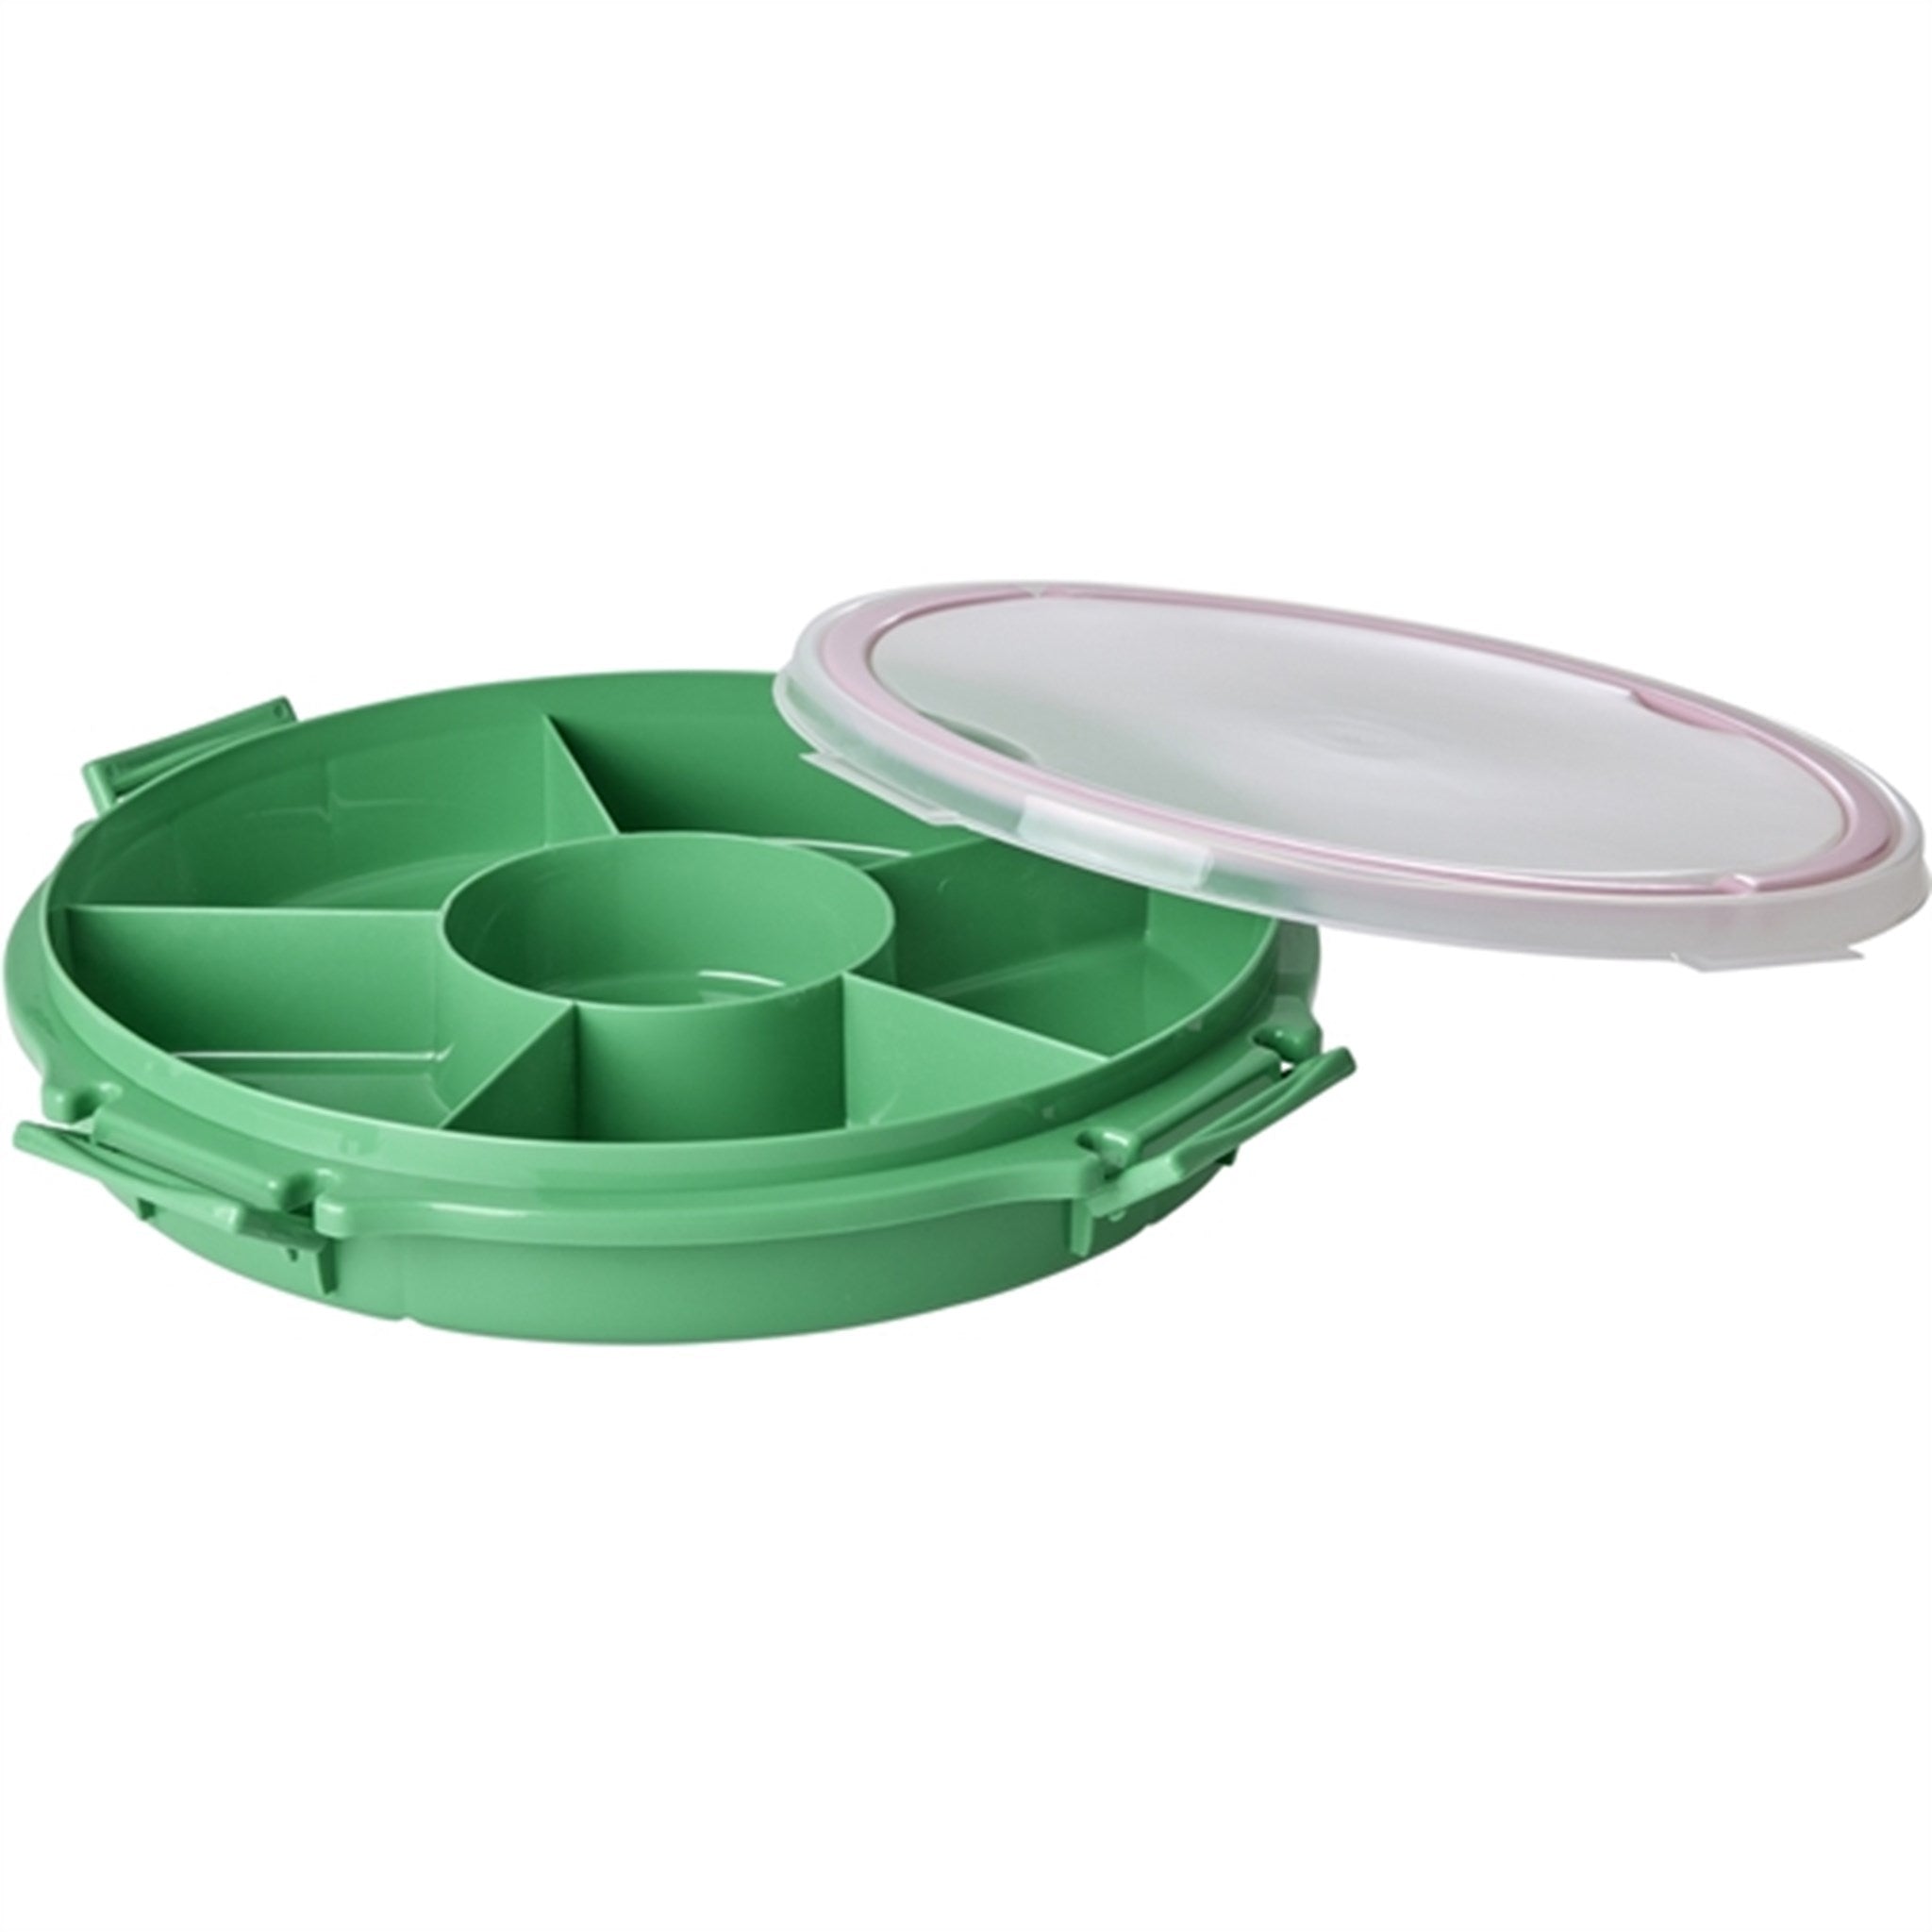 RICE Green Serving Tray